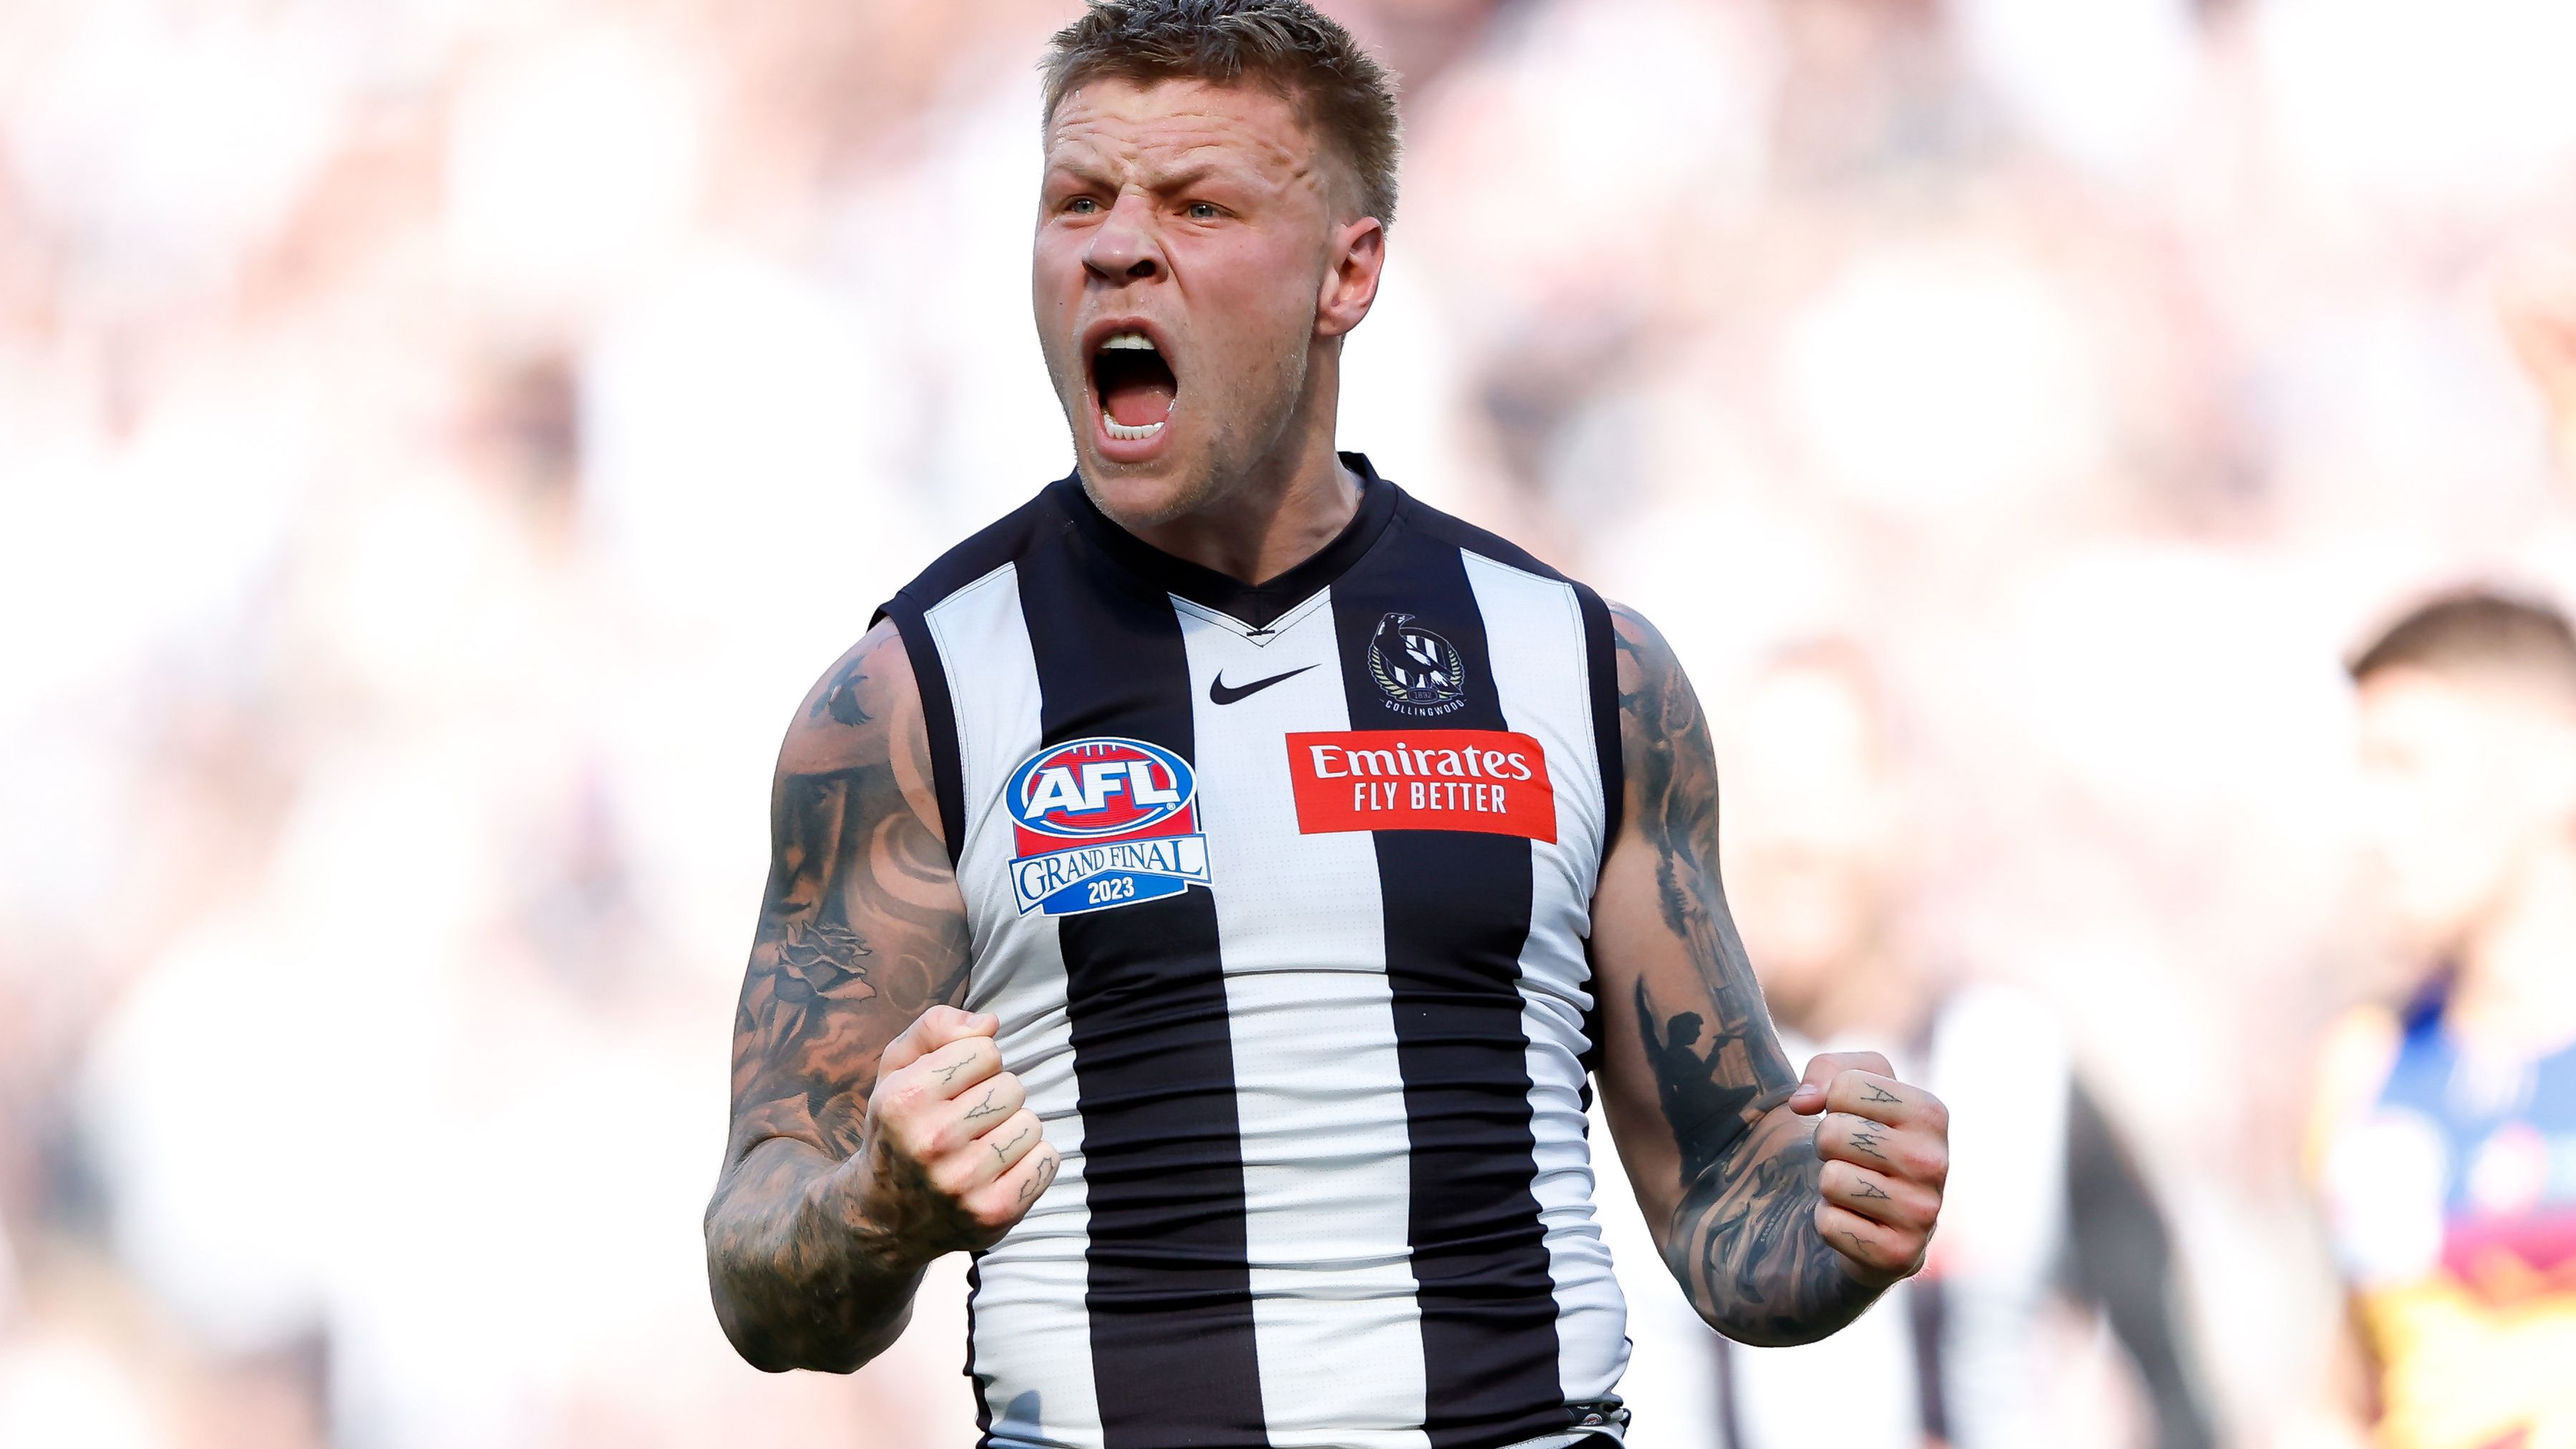 MELBOURNE, AUSTRALIA - SEPTEMBER 30: Jordan De Goey of the Magpies celebrates a goal during the 2023 AFL Grand Final match between the Collingwood Magpies and the Brisbane Lions at the Melbourne Cricket Ground on September 30, 2023 in Melbourne, Australia. (Photo by Dylan Burns/AFL Photos via Getty Images)